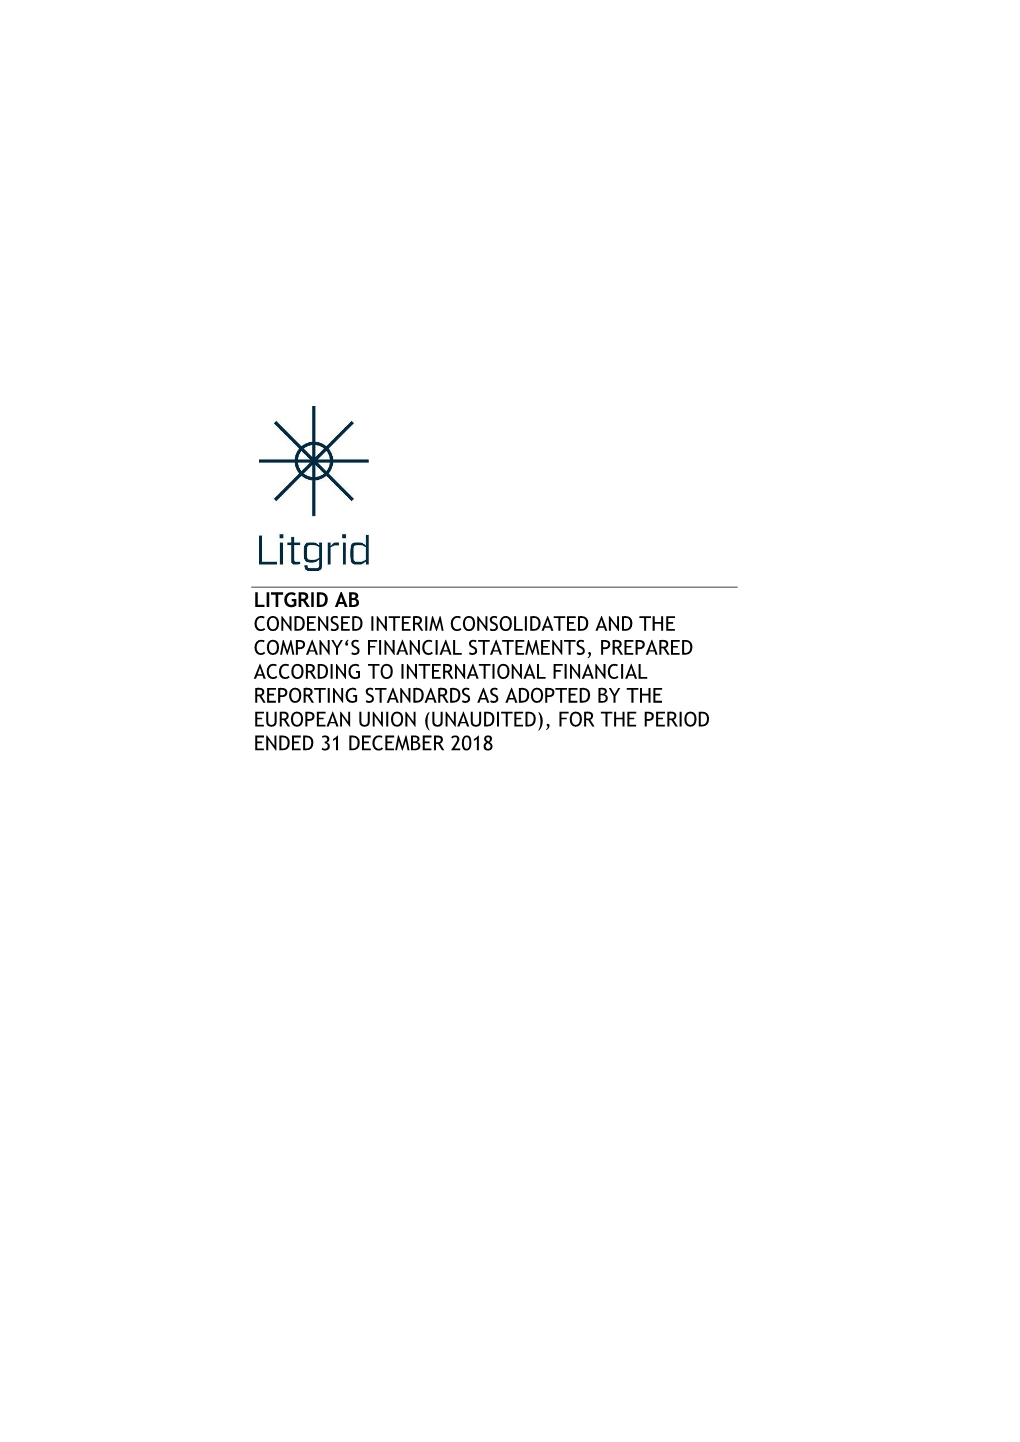 Litgrid Ab Condensed Interim Consolidated and the Company's Financial Statements, Prepared According to International Financia